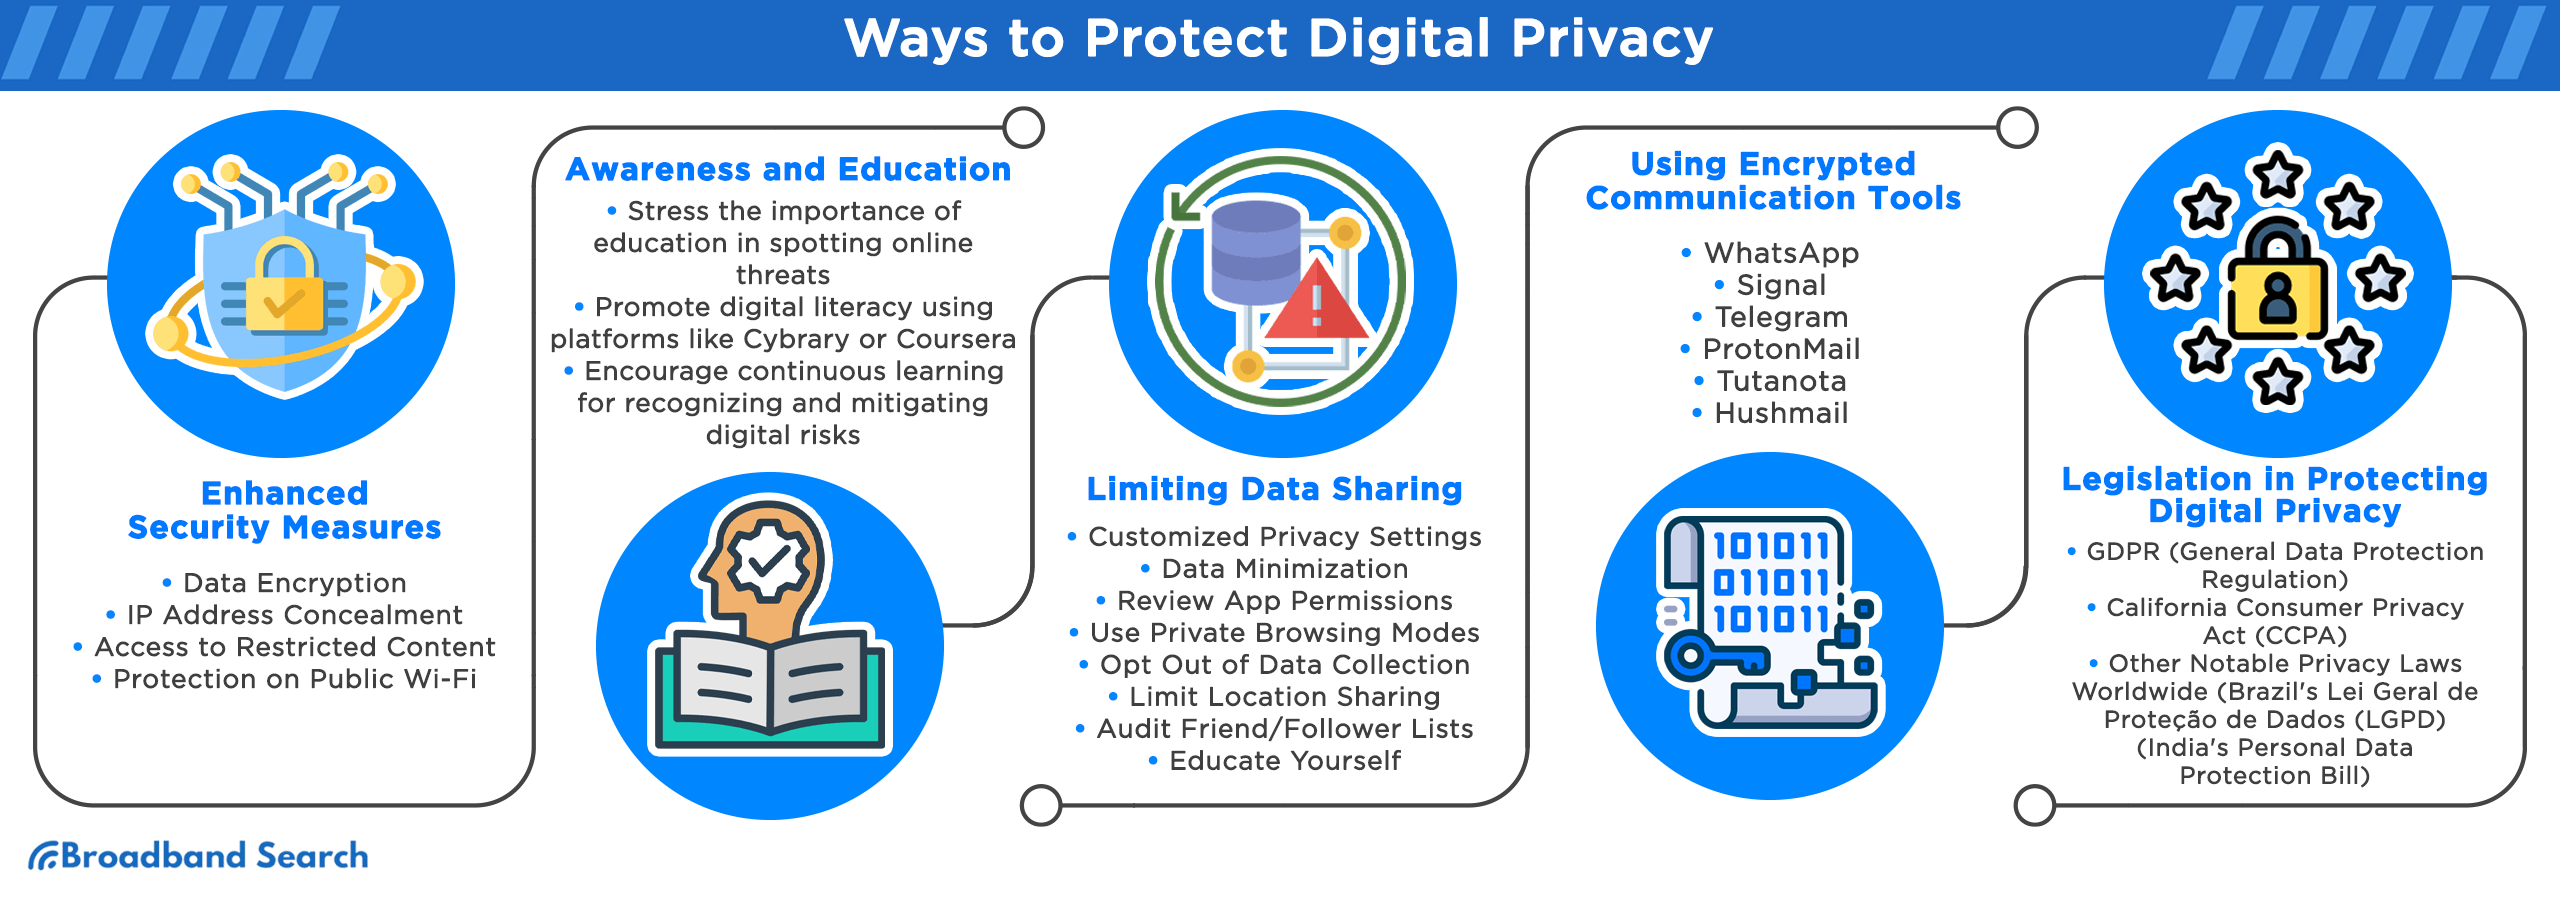 5 different ways to protect digital privacy